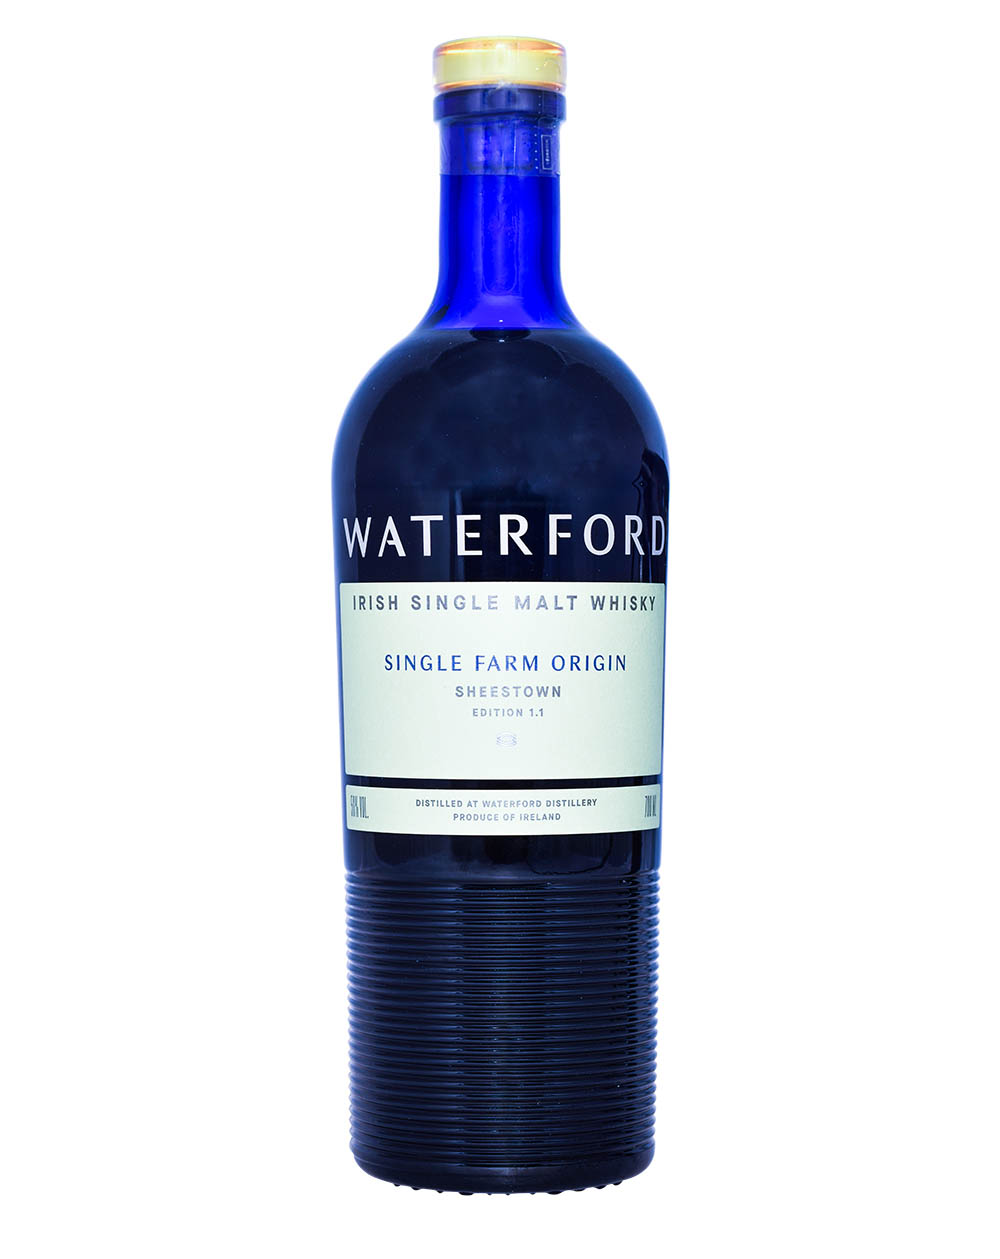 Waterford Single Farm Origin Sheestown Edition 1.1 Musthave Malts MHM